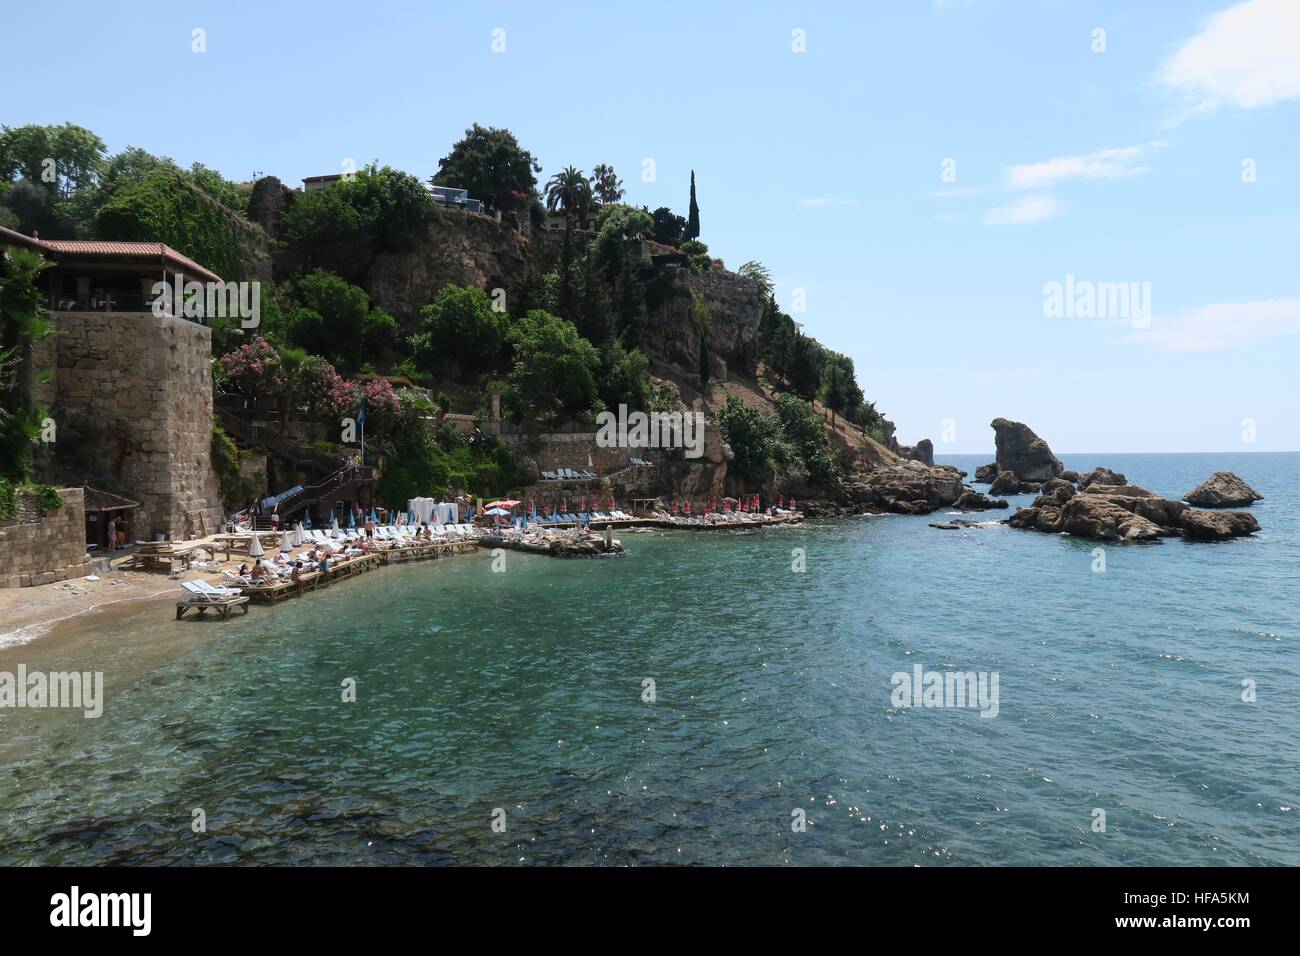 Mermerli Beach and Restaurant with the City Walls in Antalyas Oldtown Kaleici, Turkey Stock Photo